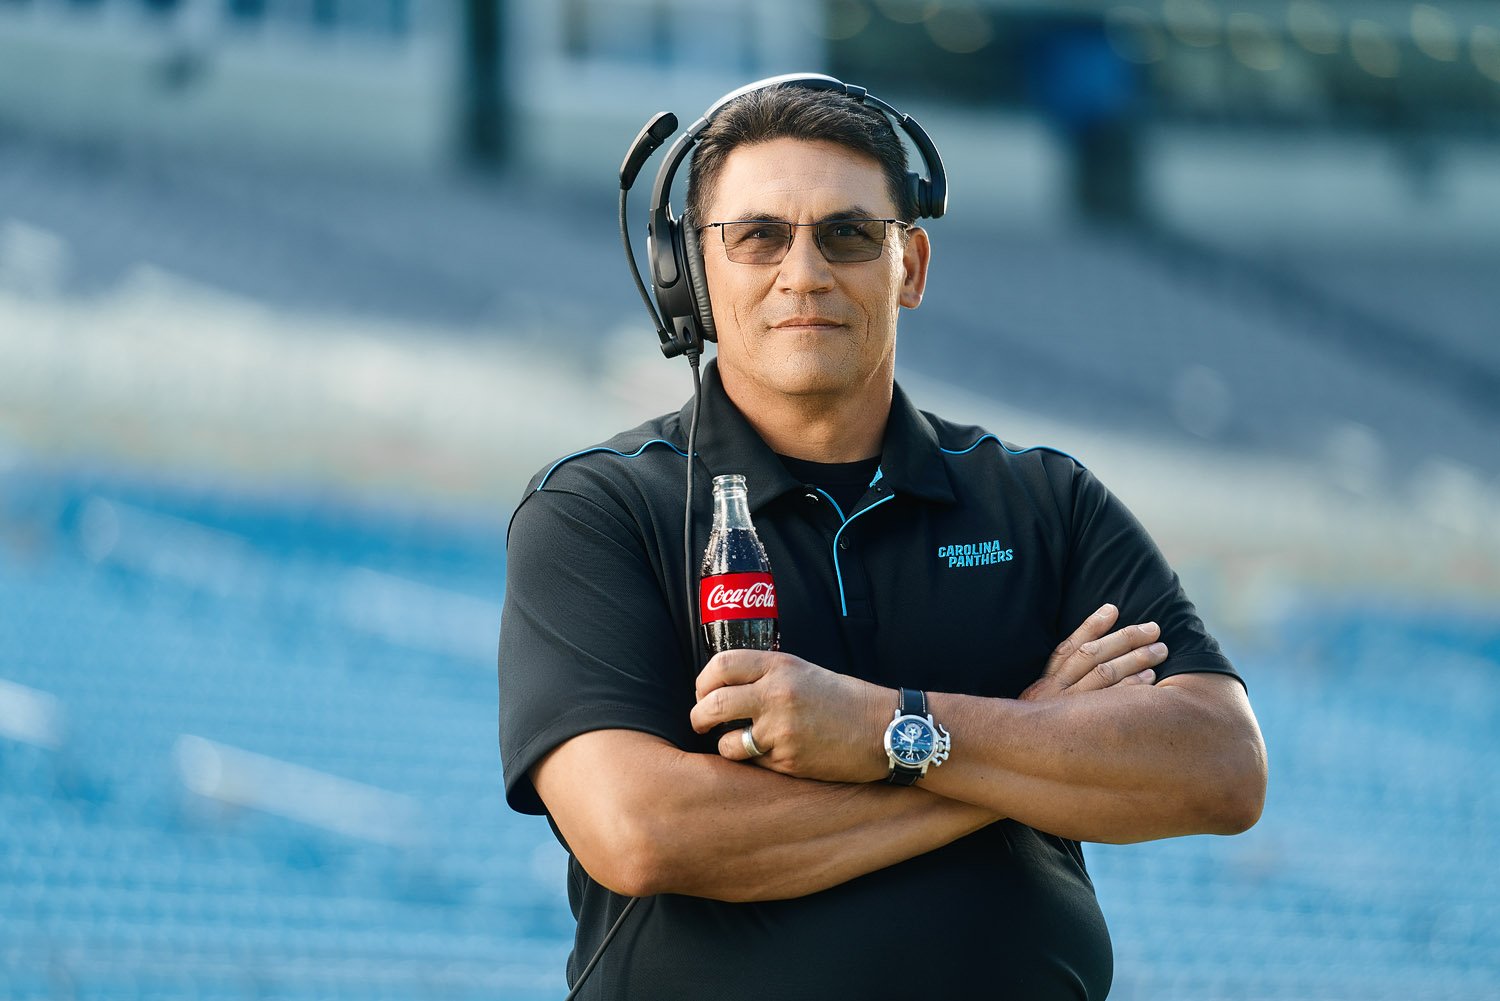 A portrait of Carolina Panthers coach holding a bottle of Coca-Cola